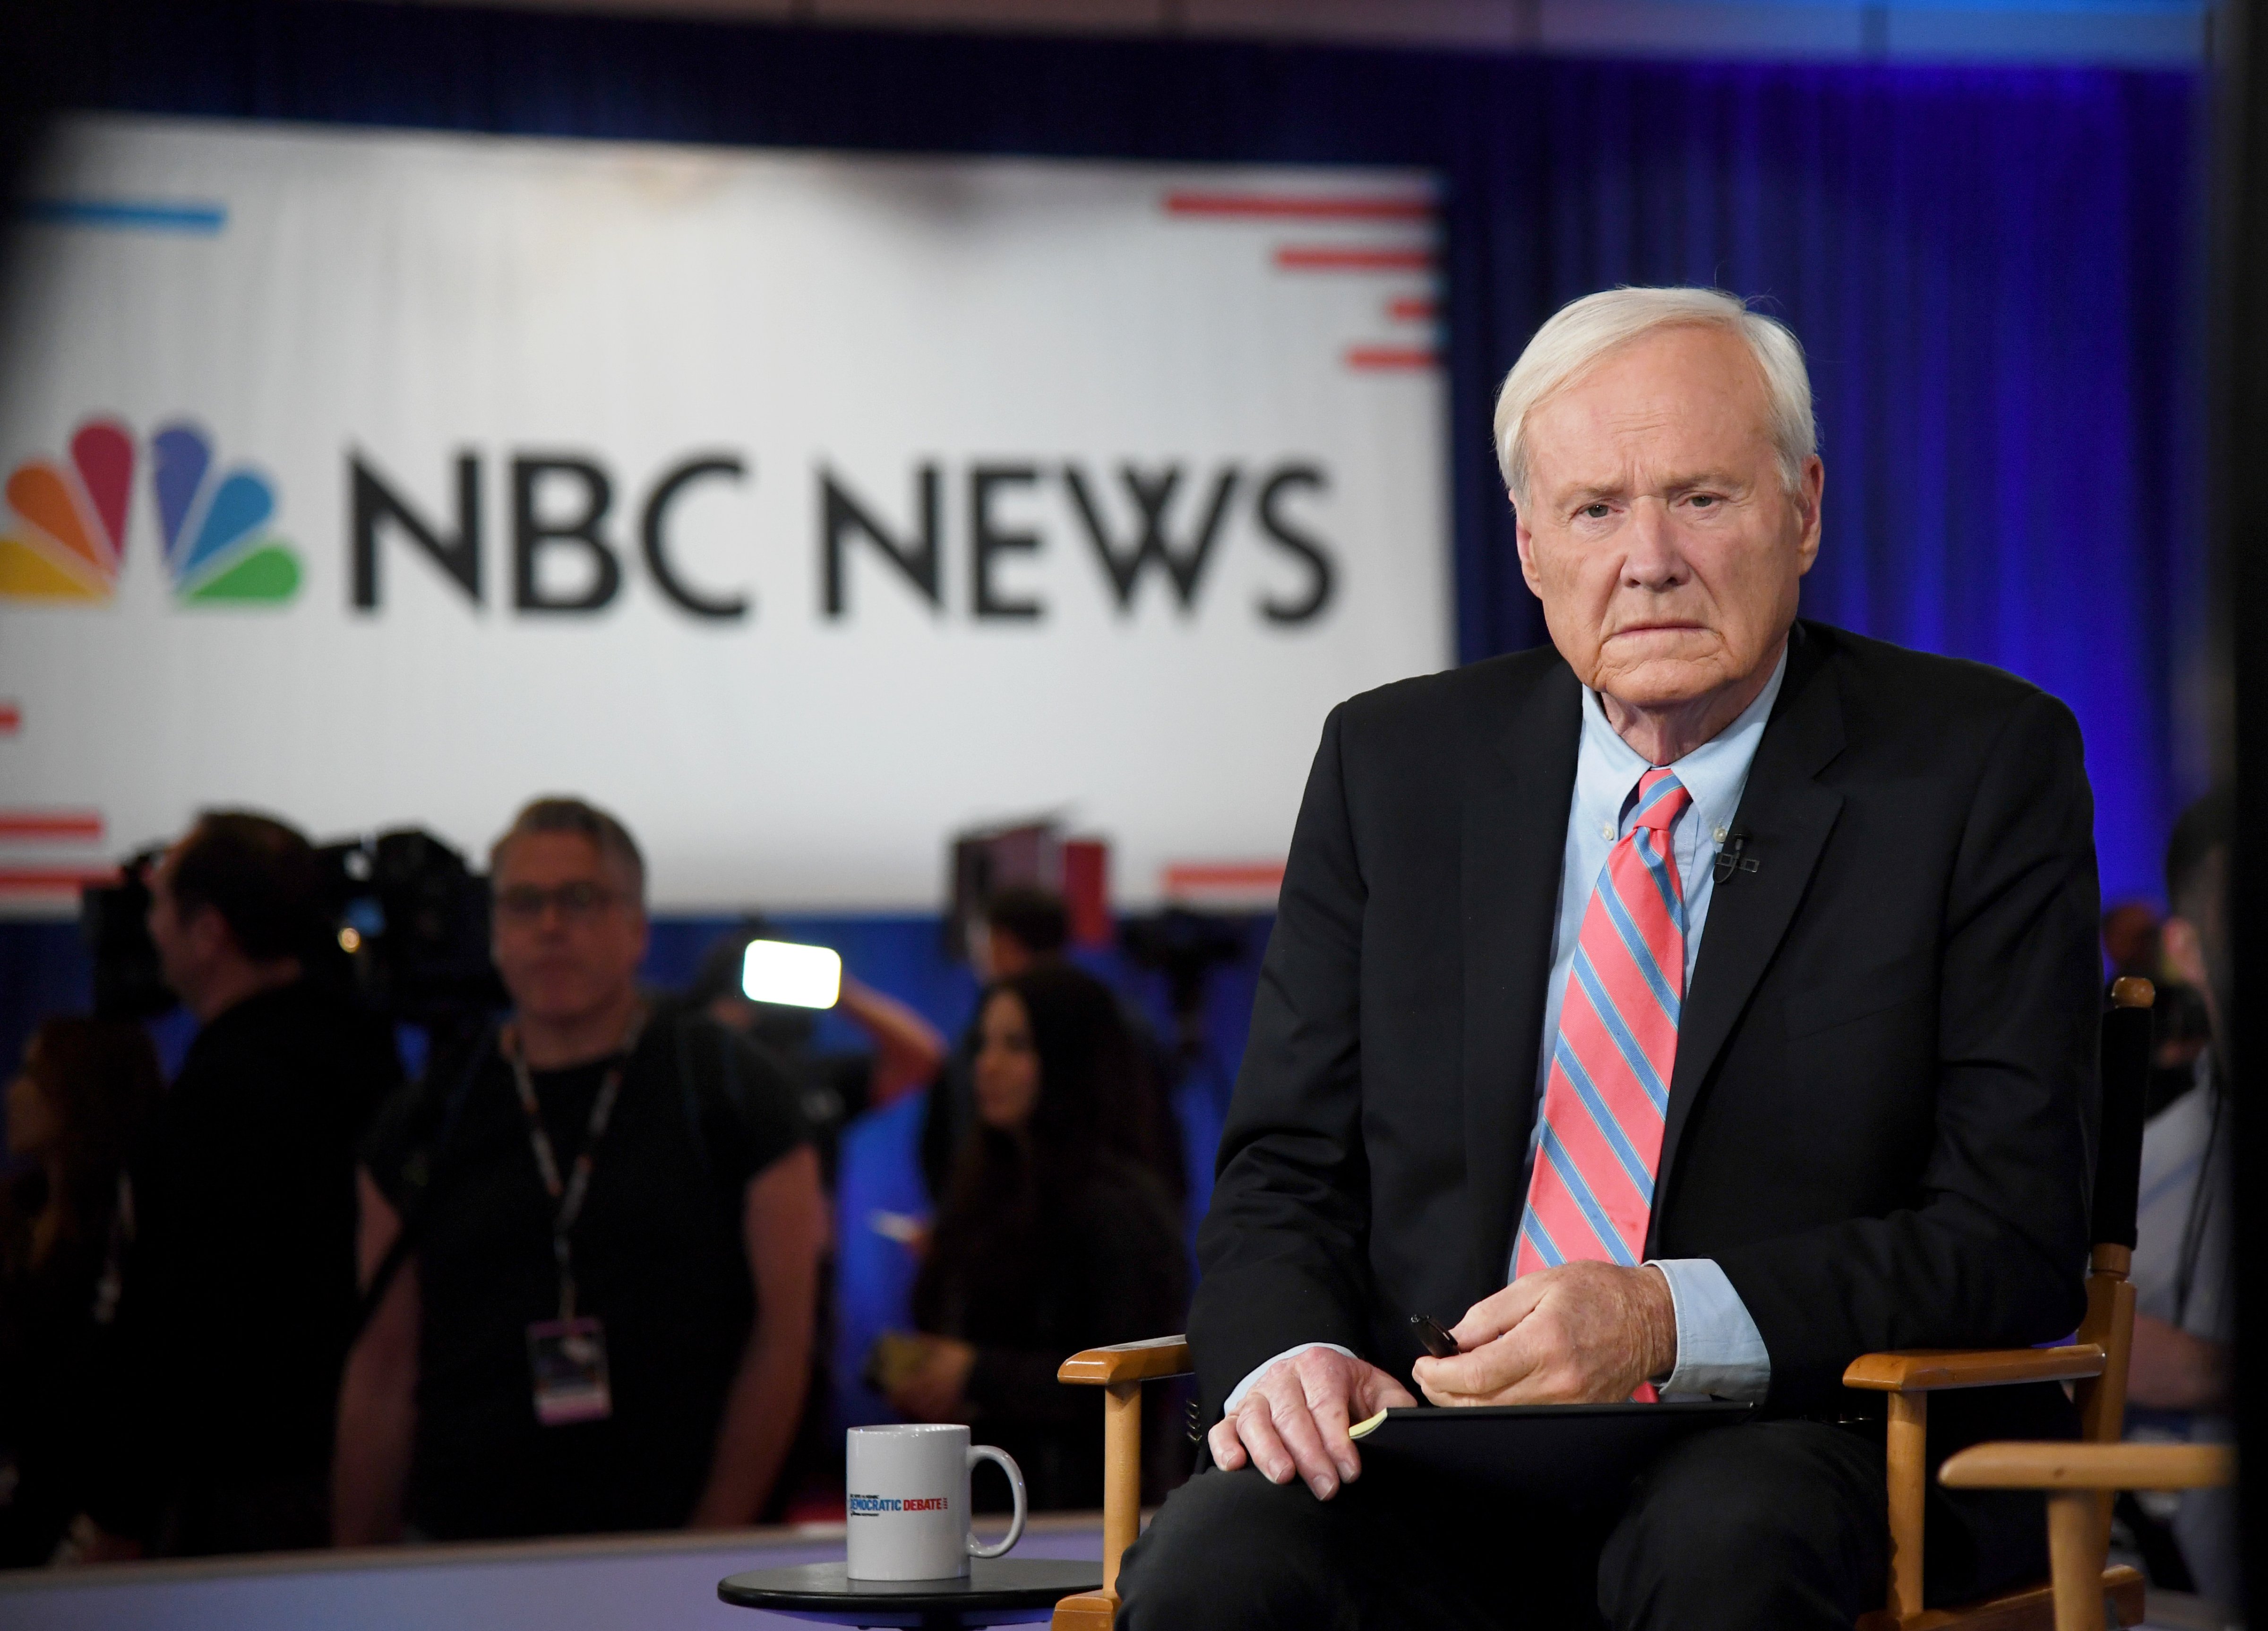 Chris Matthews of MSNBC waits to go on the air after the Democratic presidential primary debate on February 19, 2020 in Las Vegas, Nevada. (Getty Images&mdash;2020 Getty Images)